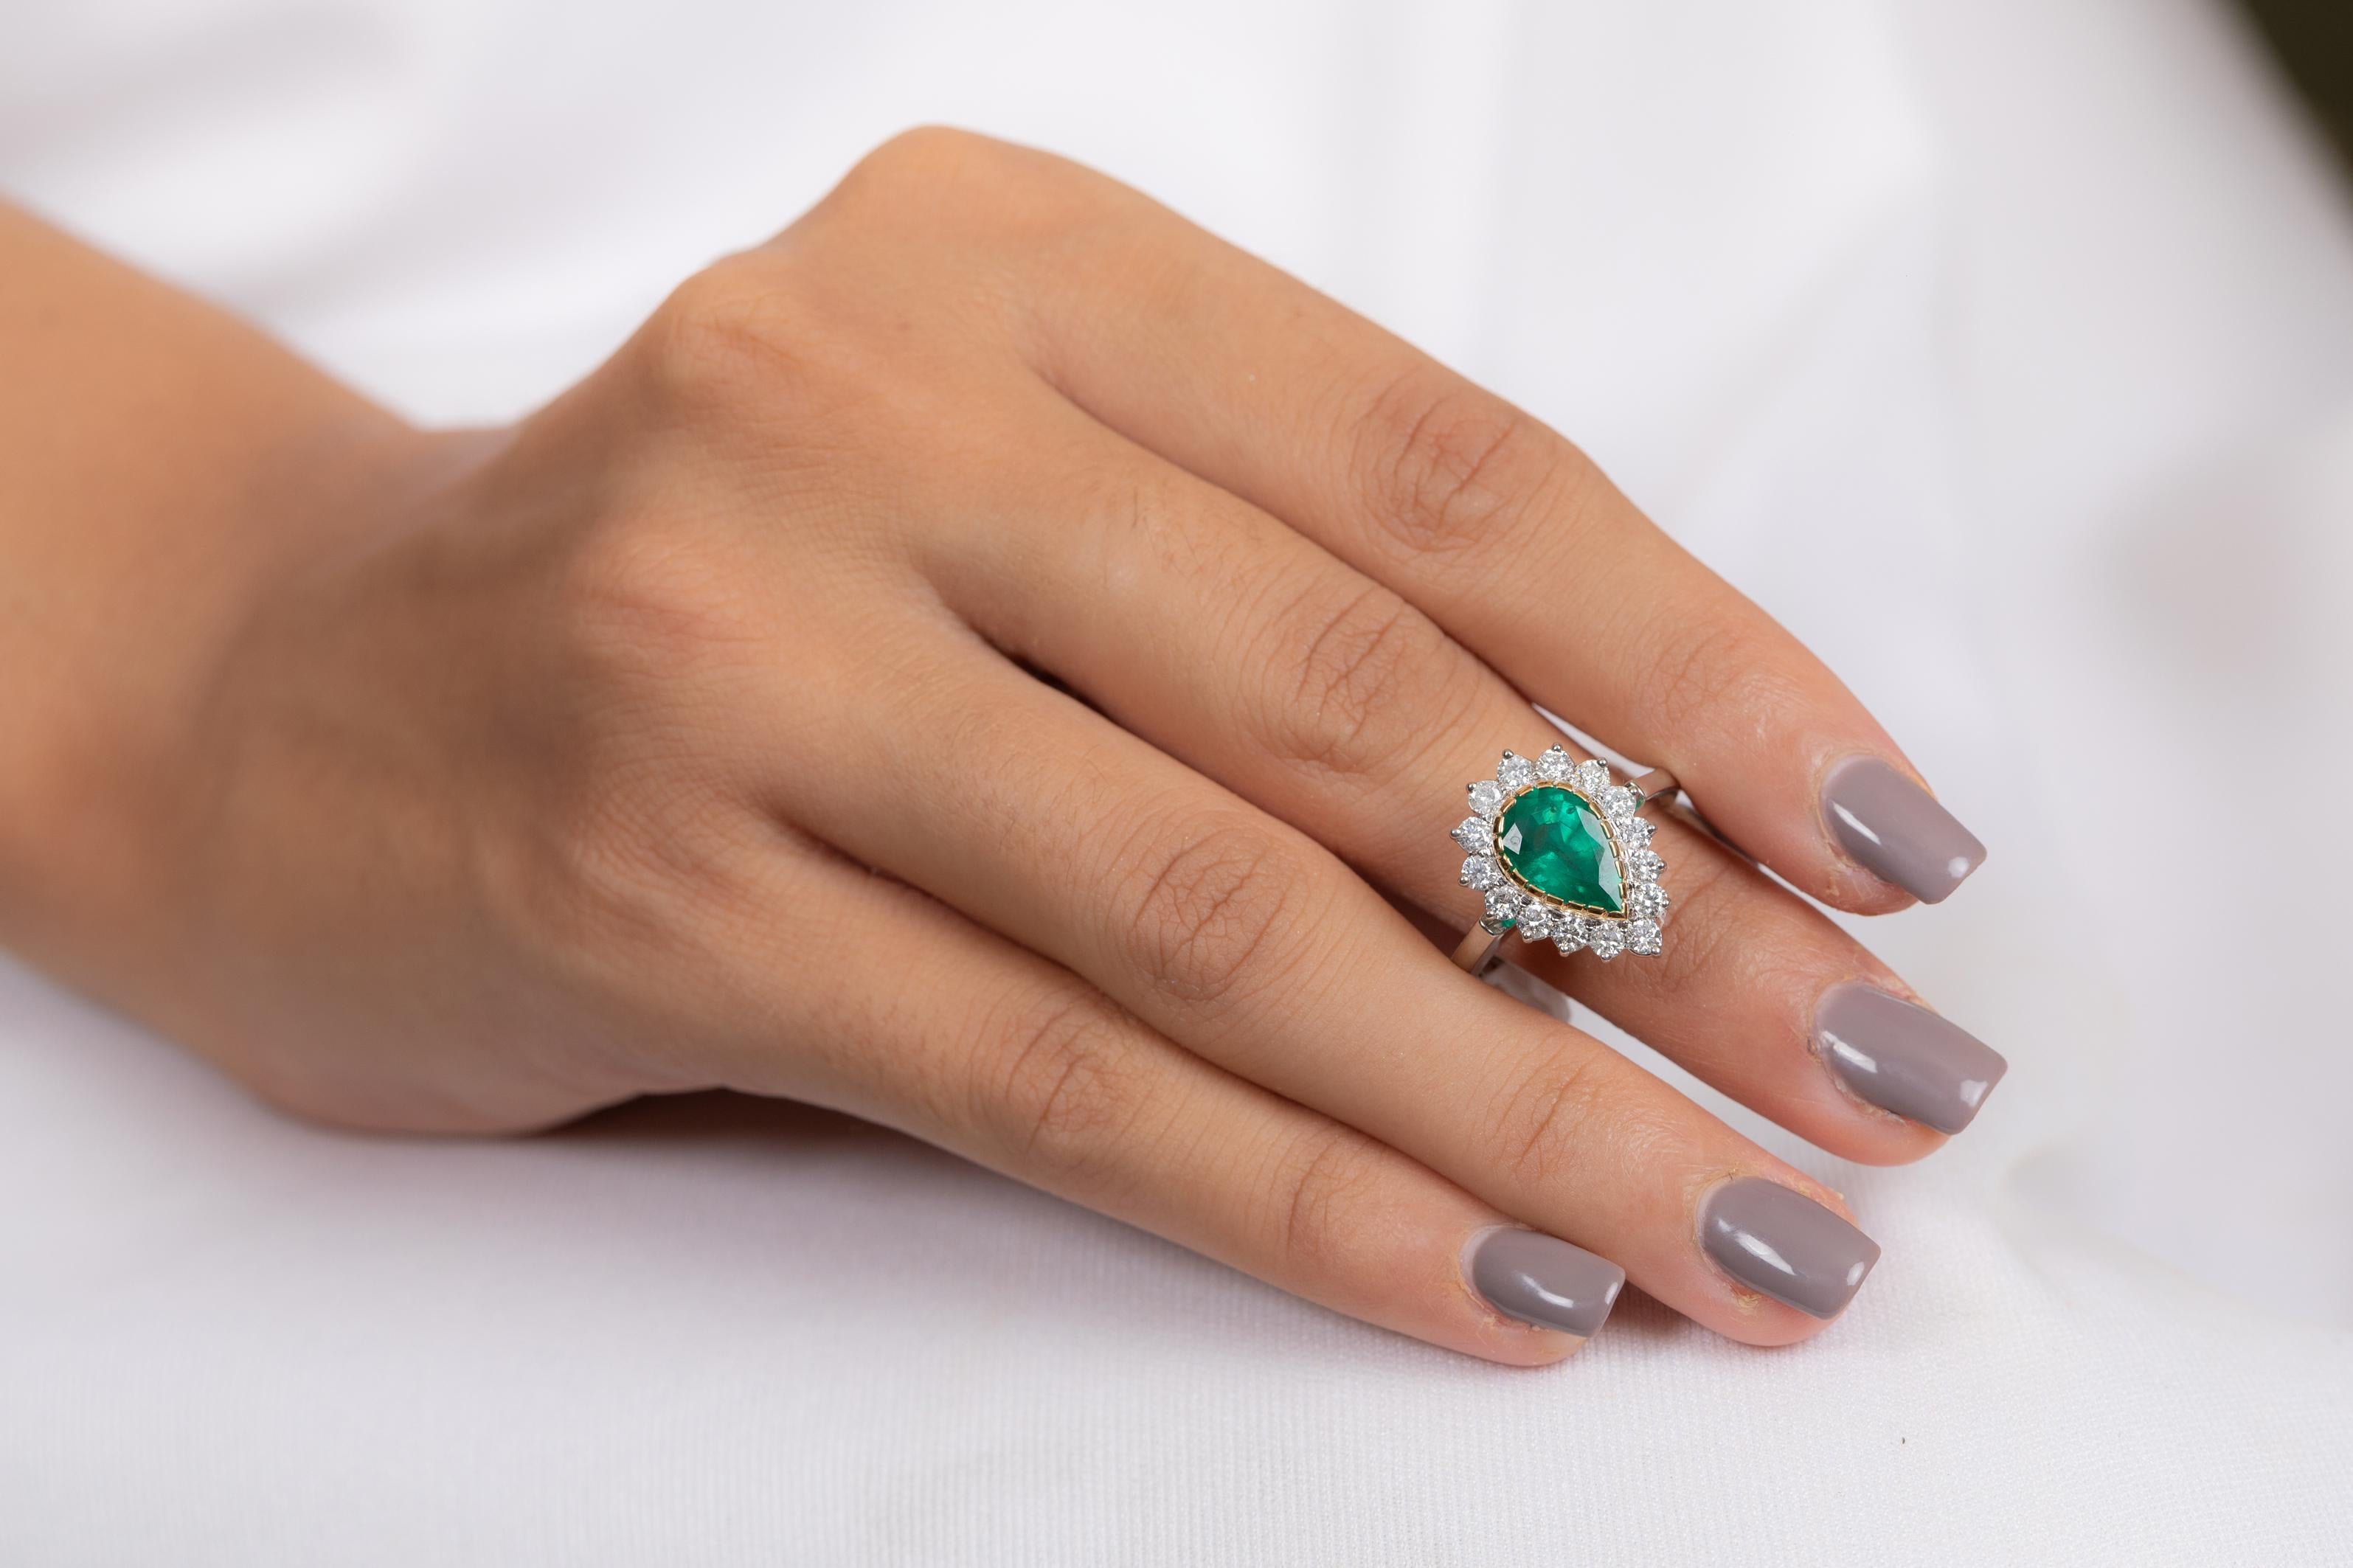 For Sale:  Statement 18k Solid White Gold Pear Emerald Halo Wedding Ring with Diamonds 8